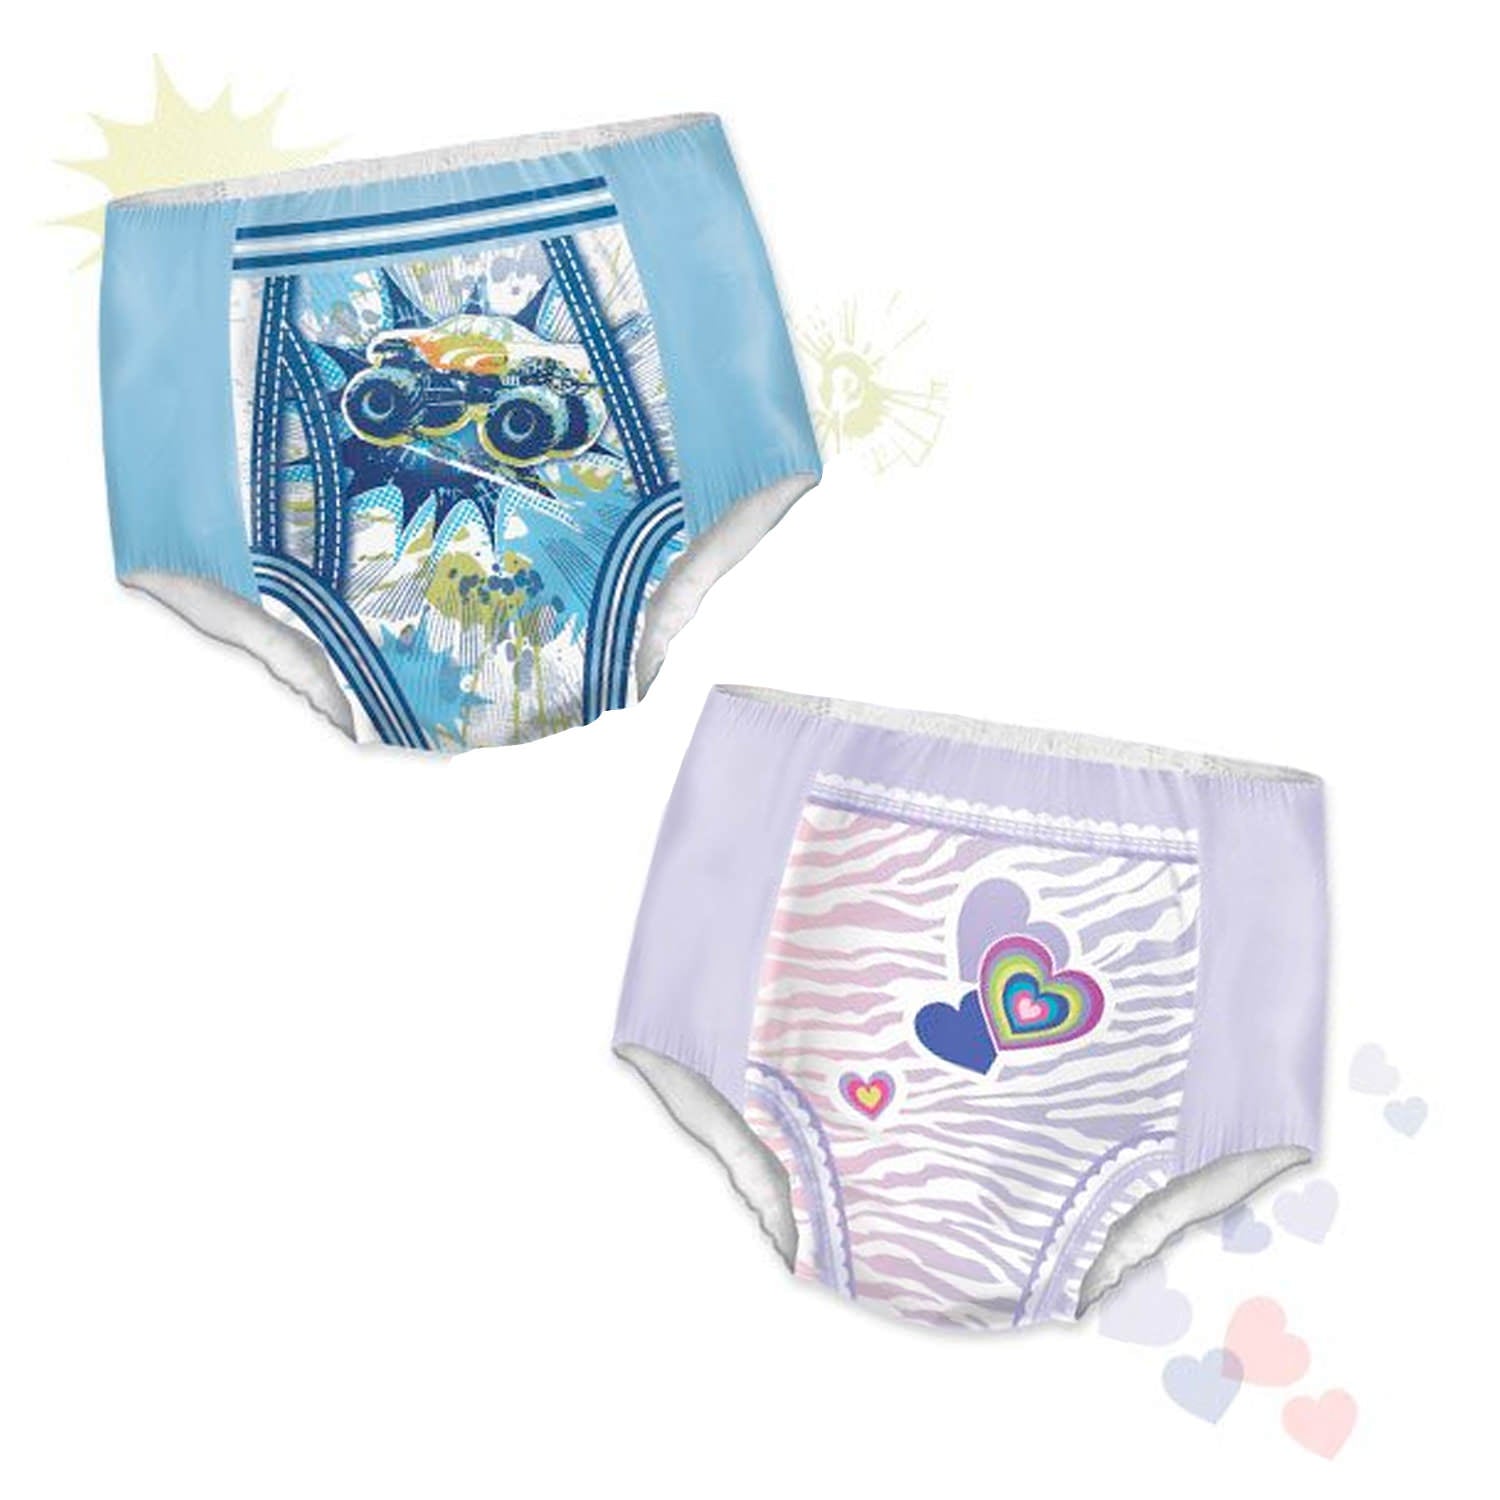 Disney 4 Pack Briefs , Underwear for Girls - Germany, New - The